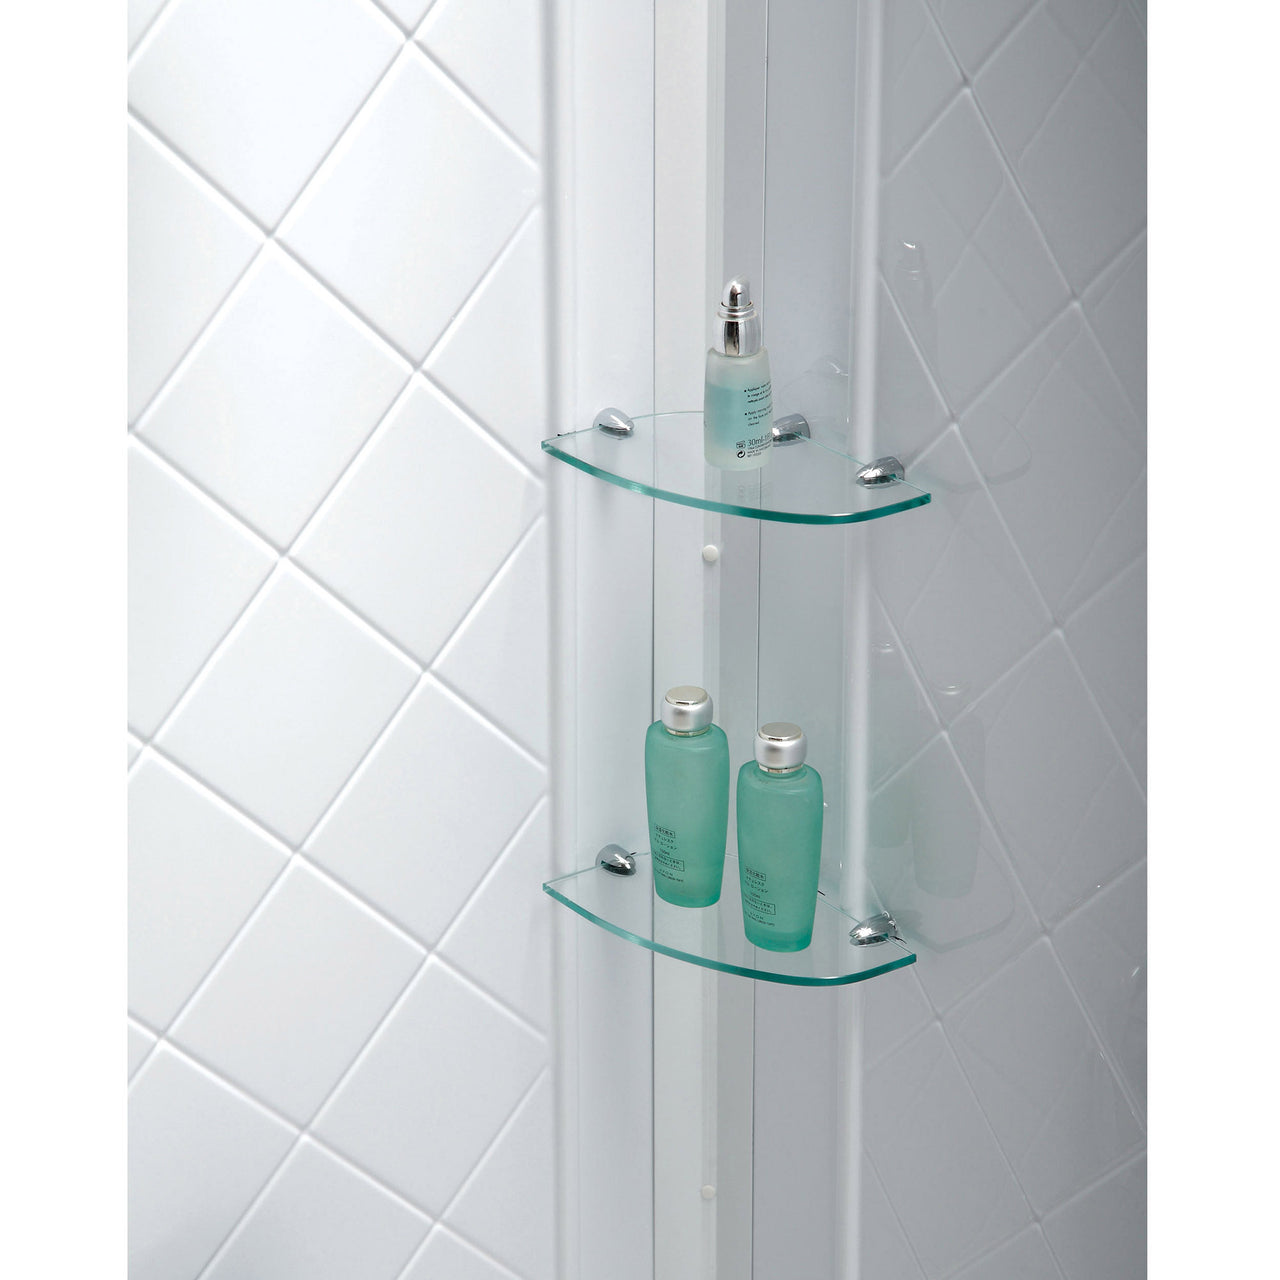 DreamLine Prime 38 in. x 38 in. x 76 3/4 in. H Sliding Shower Enclosure, Shower Base and QWALL-4 Acrylic Backwall Kit, Clear Glass - BNGBath